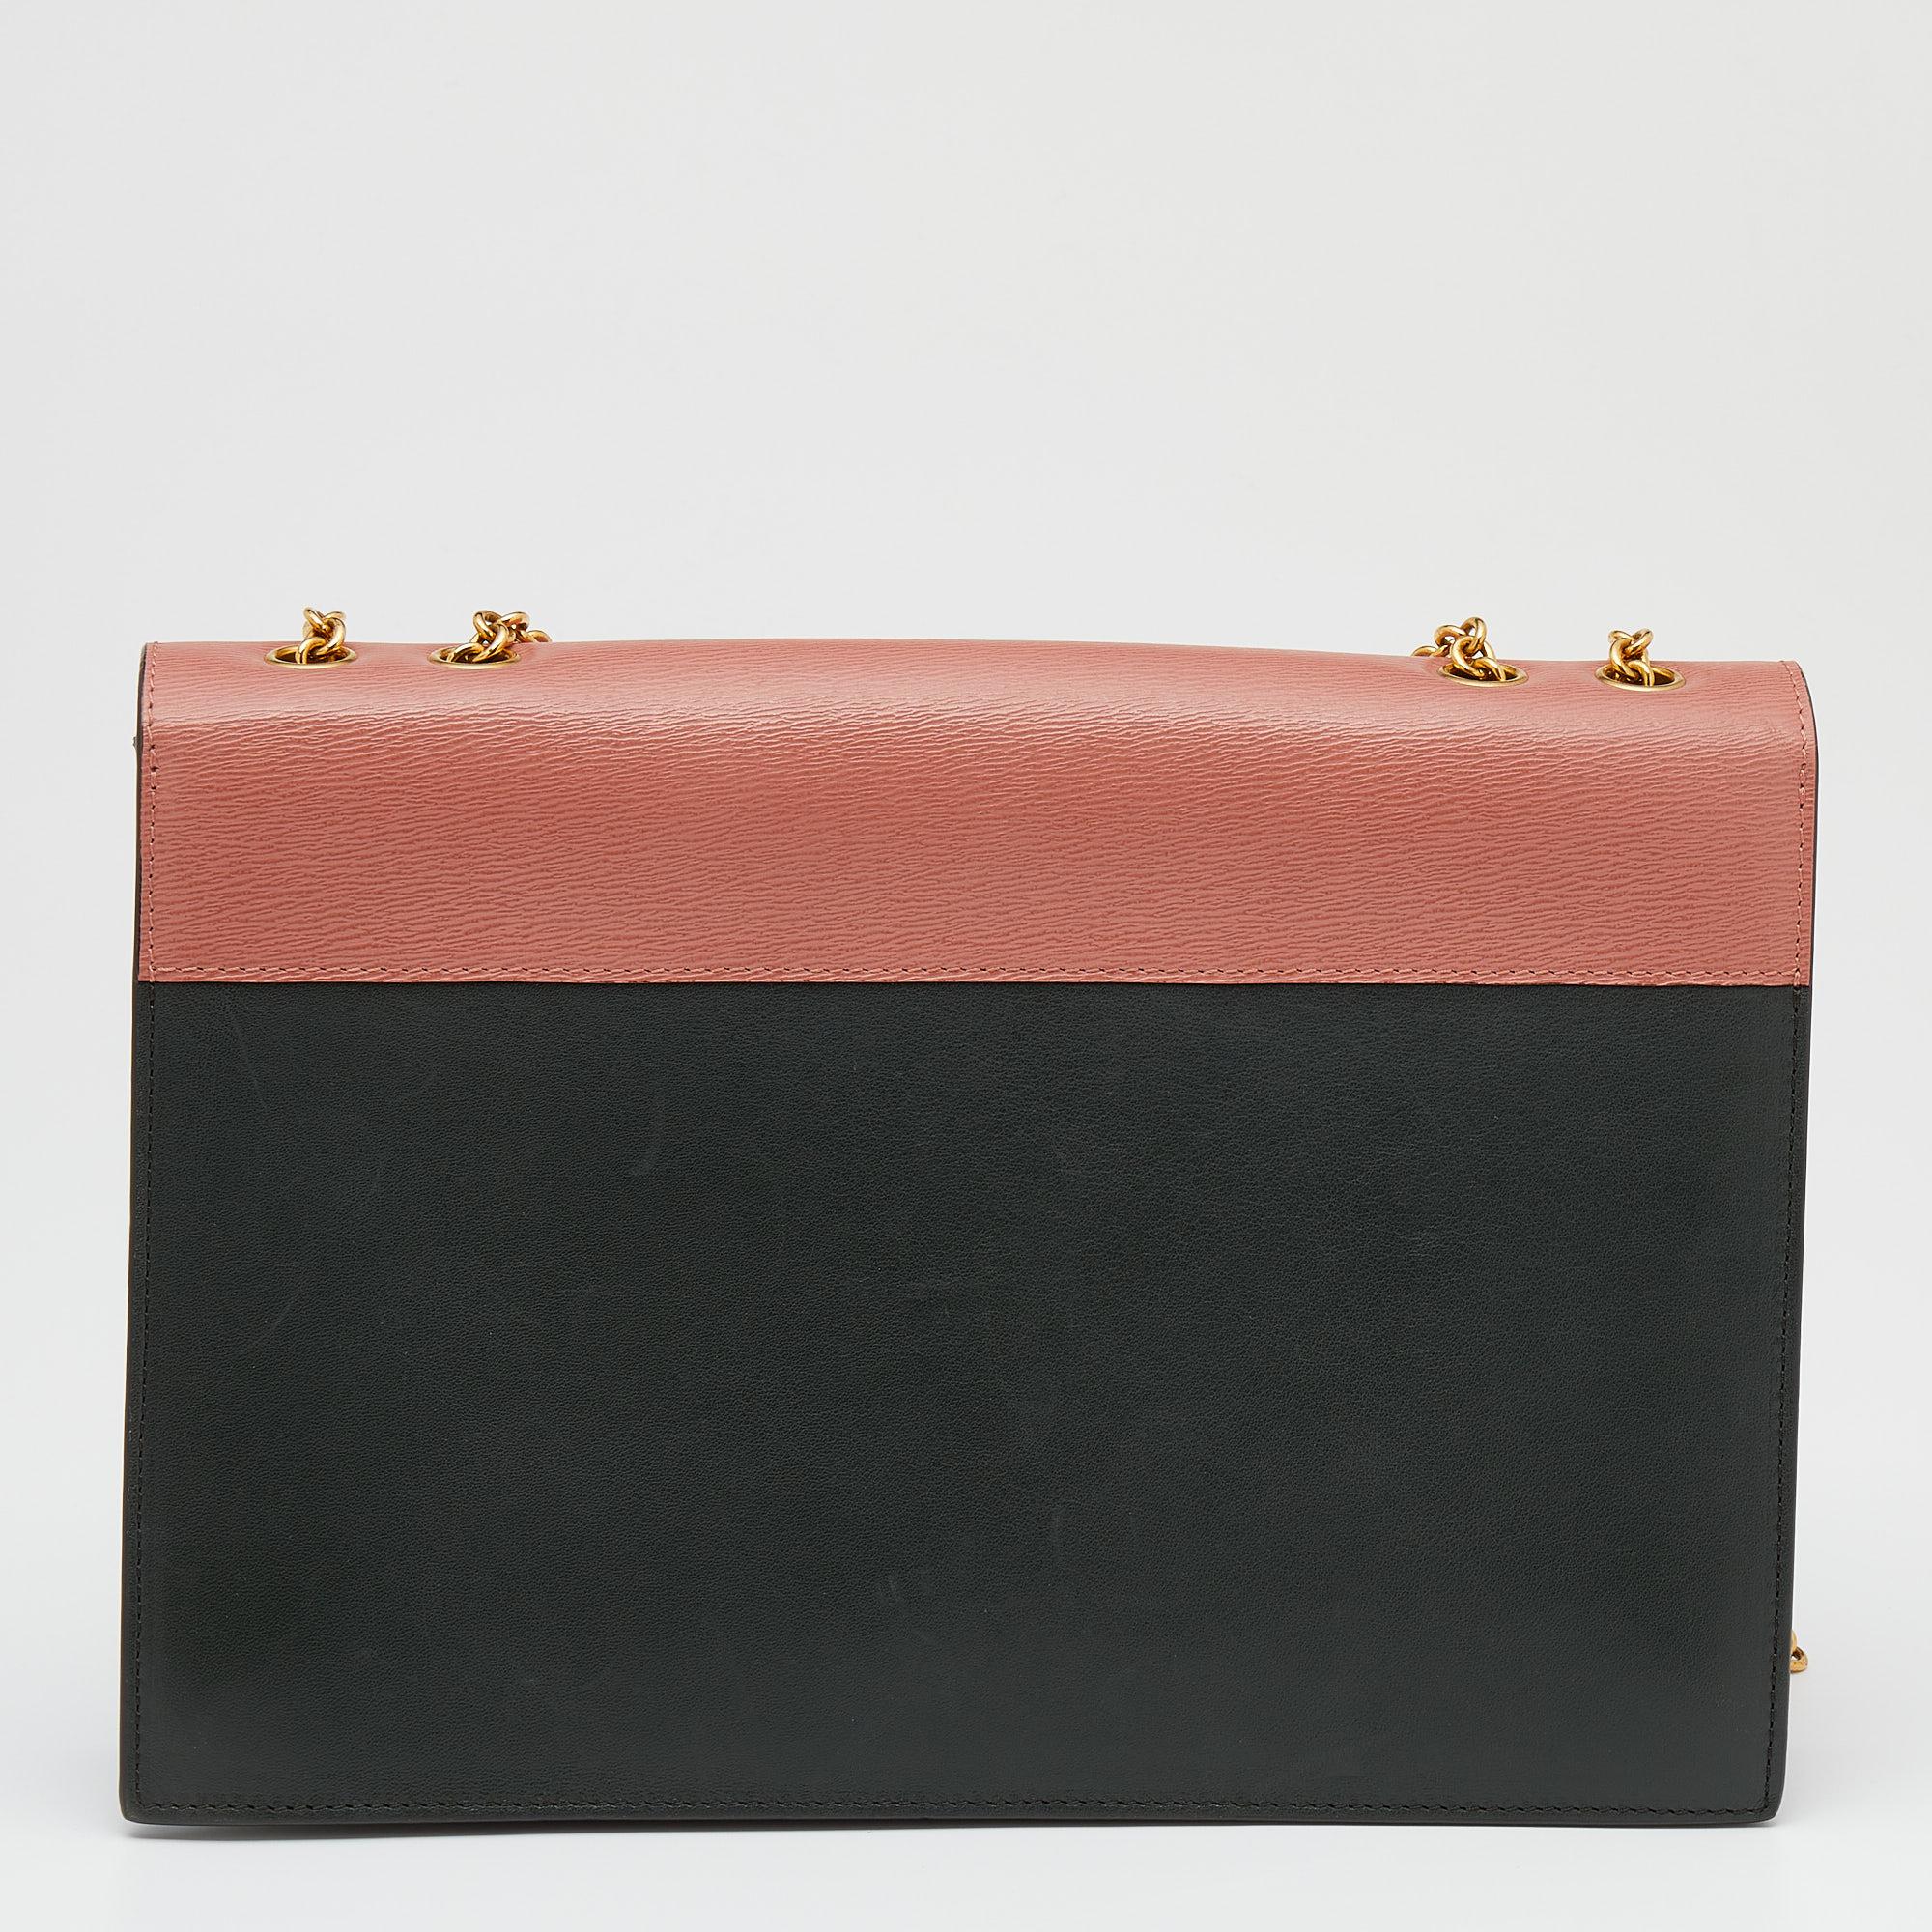 The combination of different shades lends this Celine bag an elegant contrast. Designed in the shape of an envelope, this leather and suede creation is as stylish as functional. It is complemented with a chain shoulder strap, button closure, and a